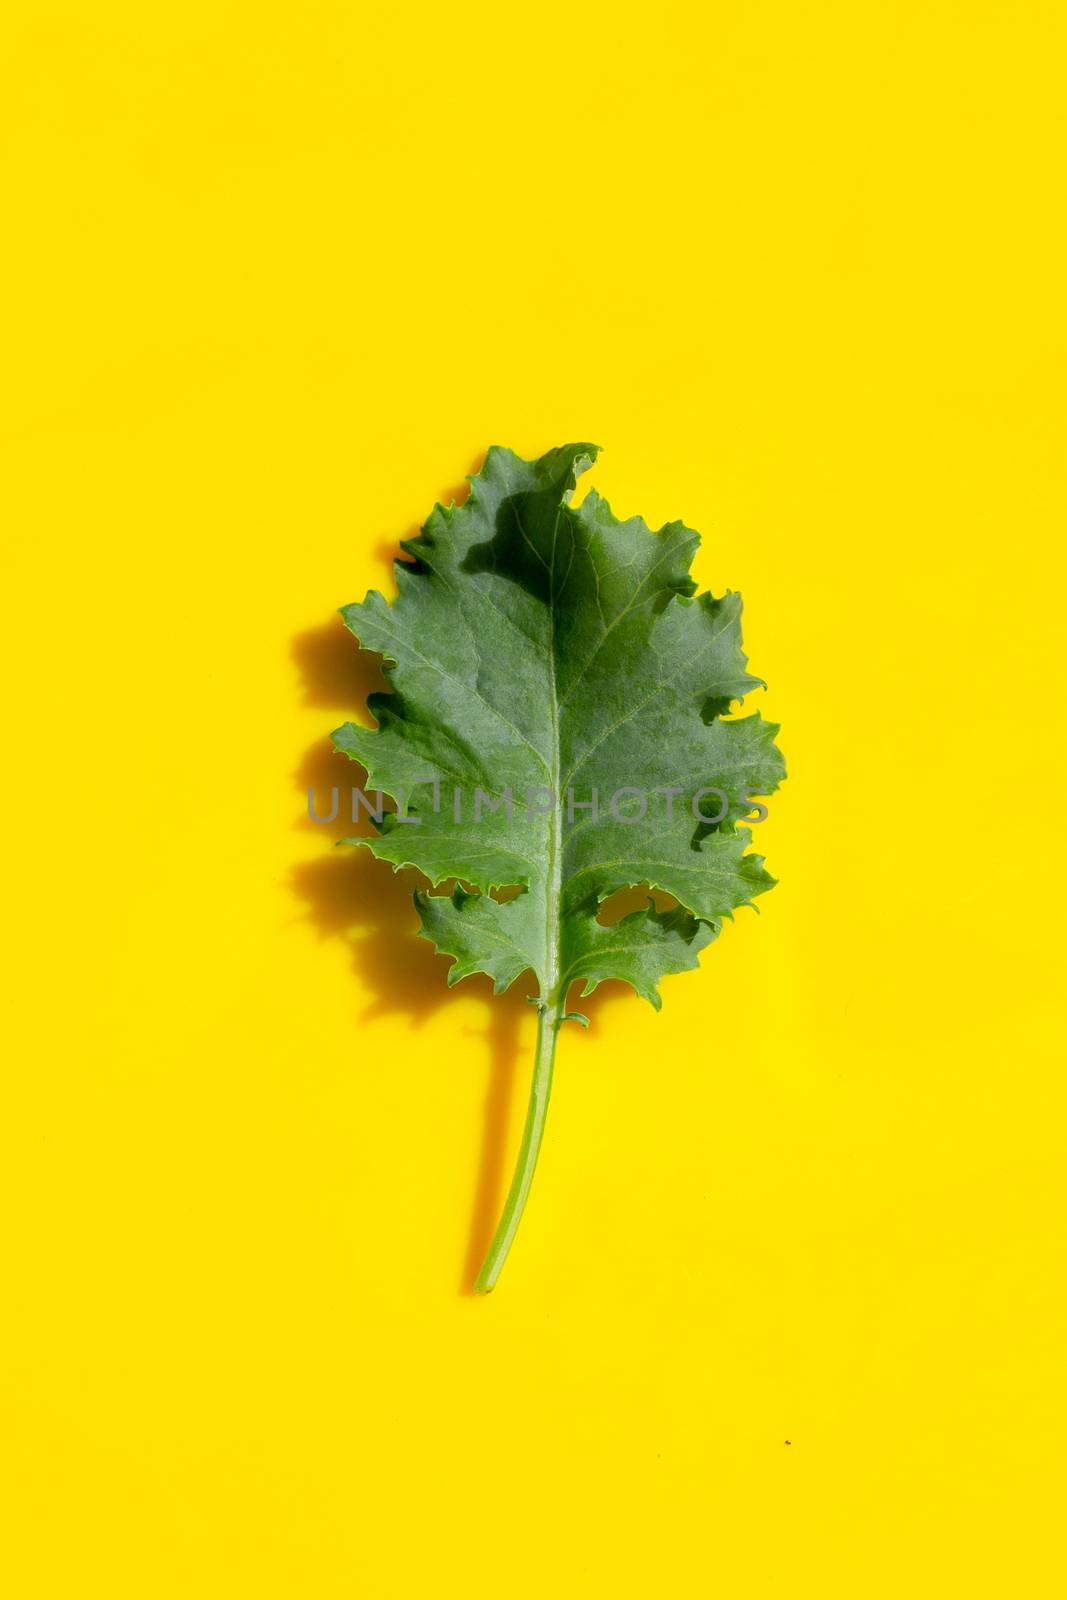 Kale leaf on yellow background.  by Bowonpat